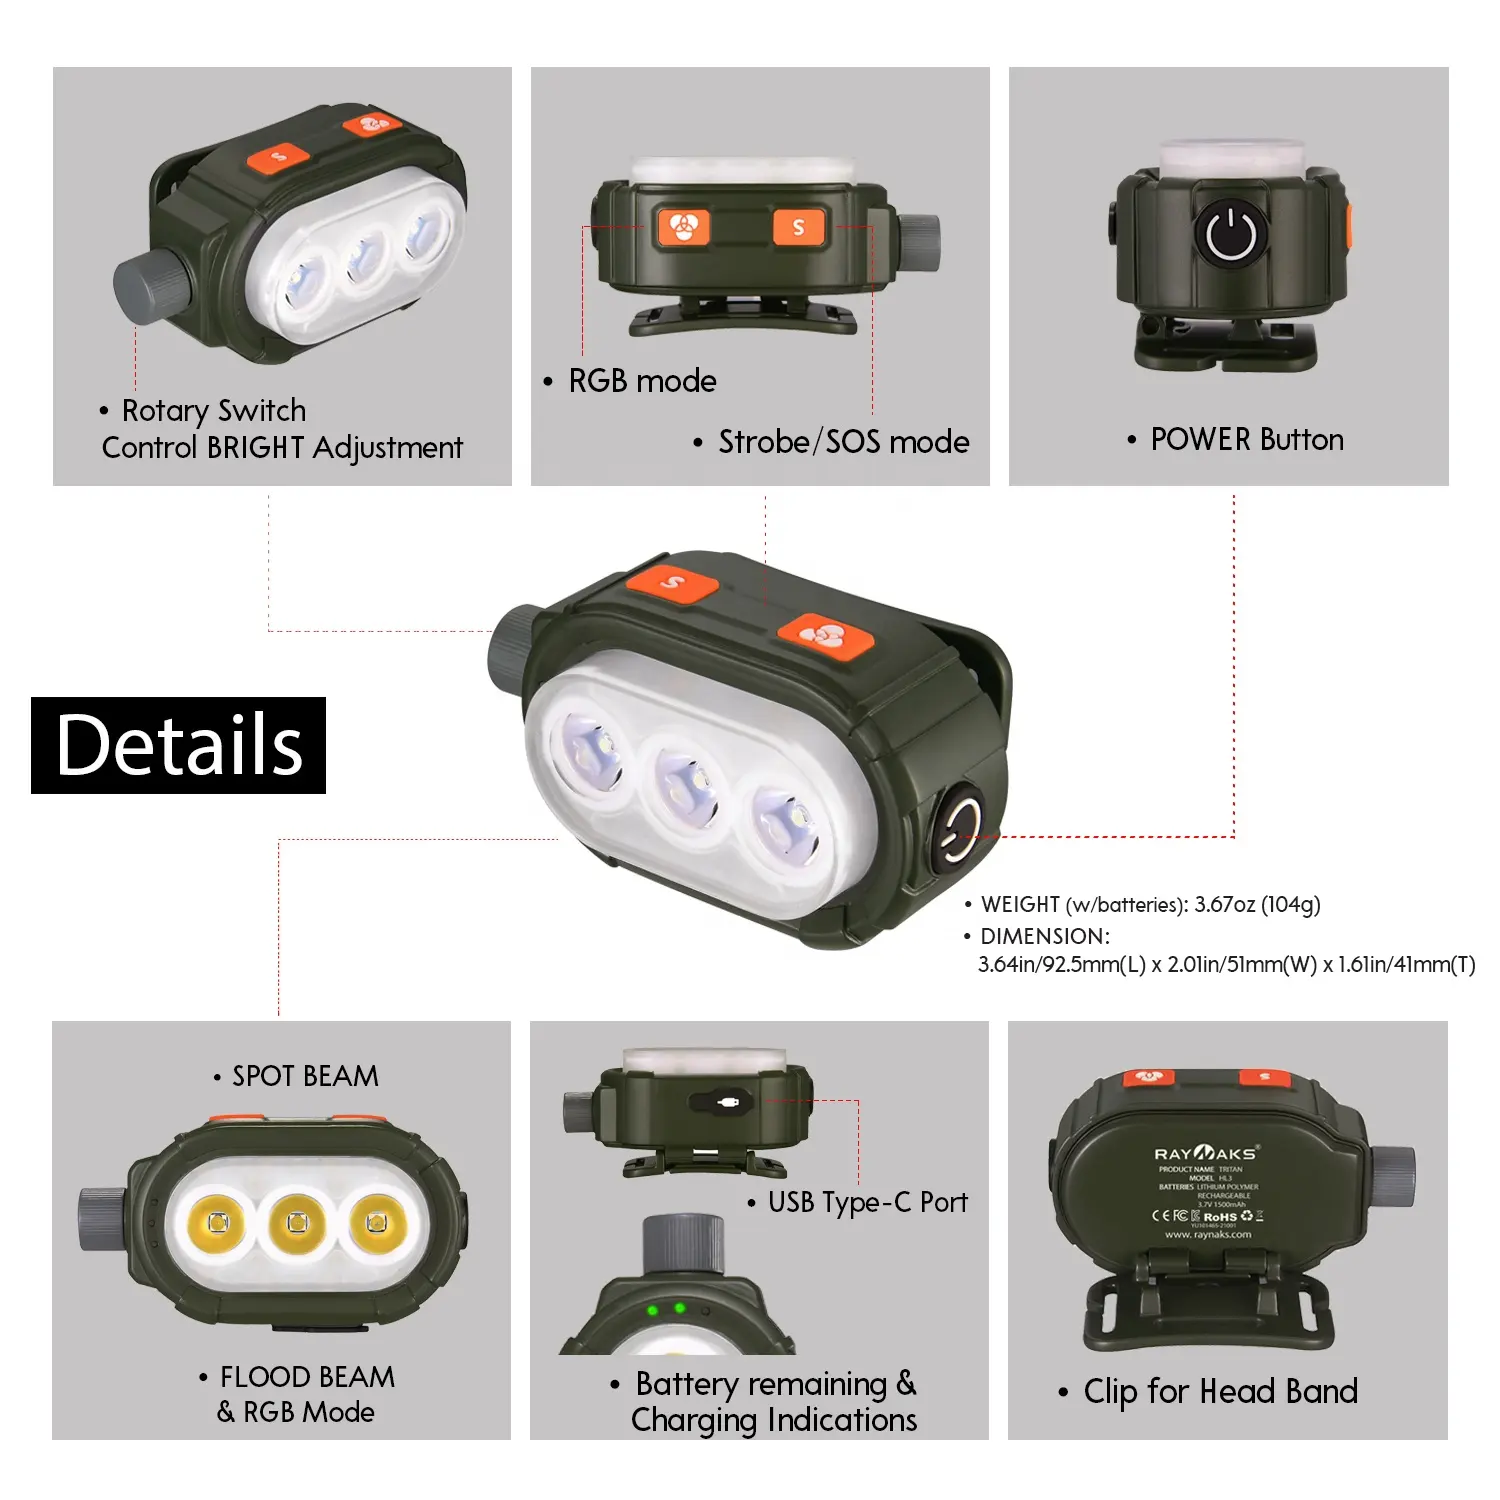 RAYNAKS 780Lumen LED Headlamps Headlights Headlamp Rechargeable Cap Lights Clip On Hat Light Outdoor Camping Light Rotary Switch